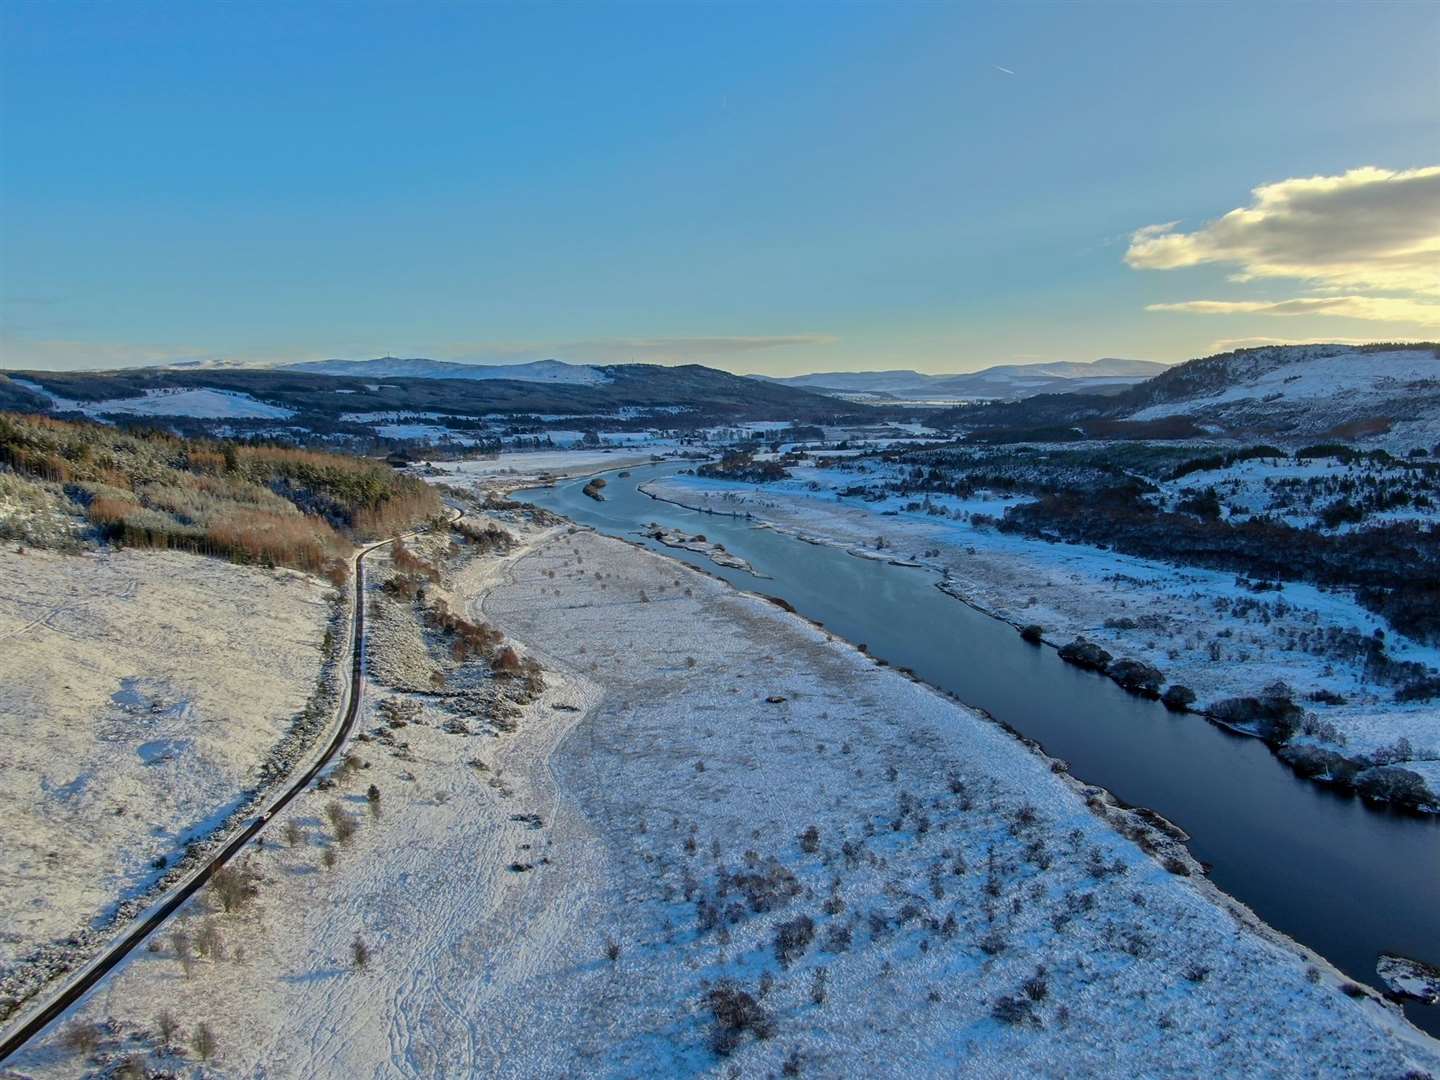 Looking up and down the Kyle of Sutherland. Photo: Alan West